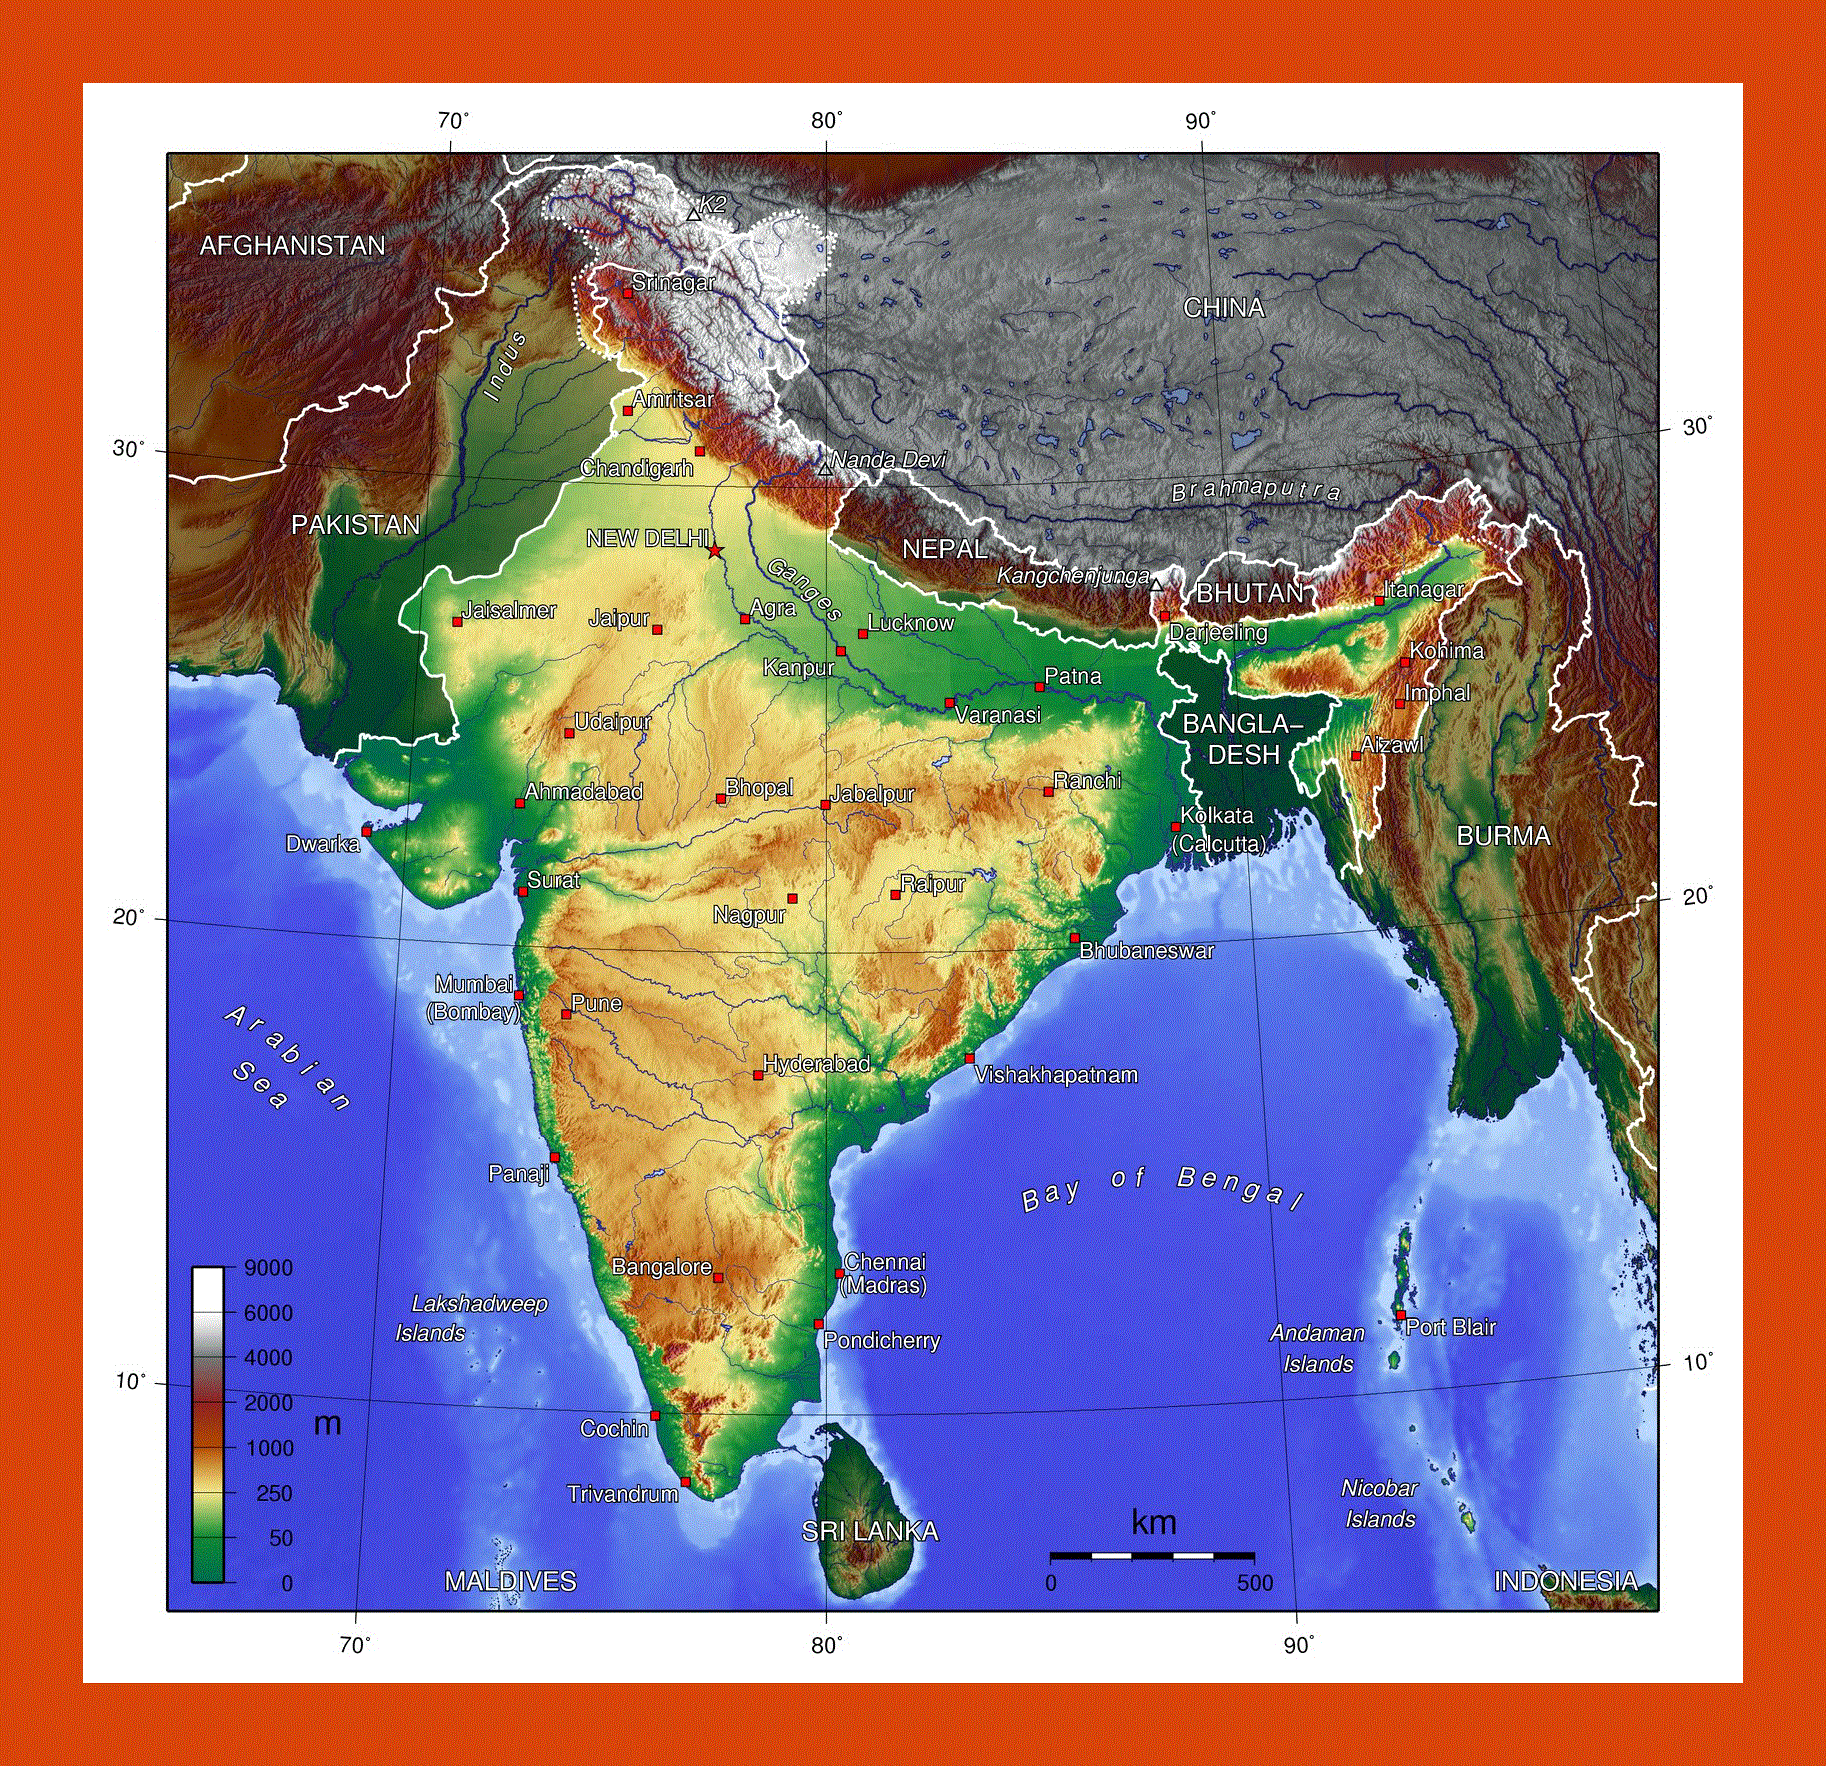 Topographical Map Of India Maps Of India Maps Of Asia Gif Map Maps Of The World In Gif Format Maps Of The Whole World